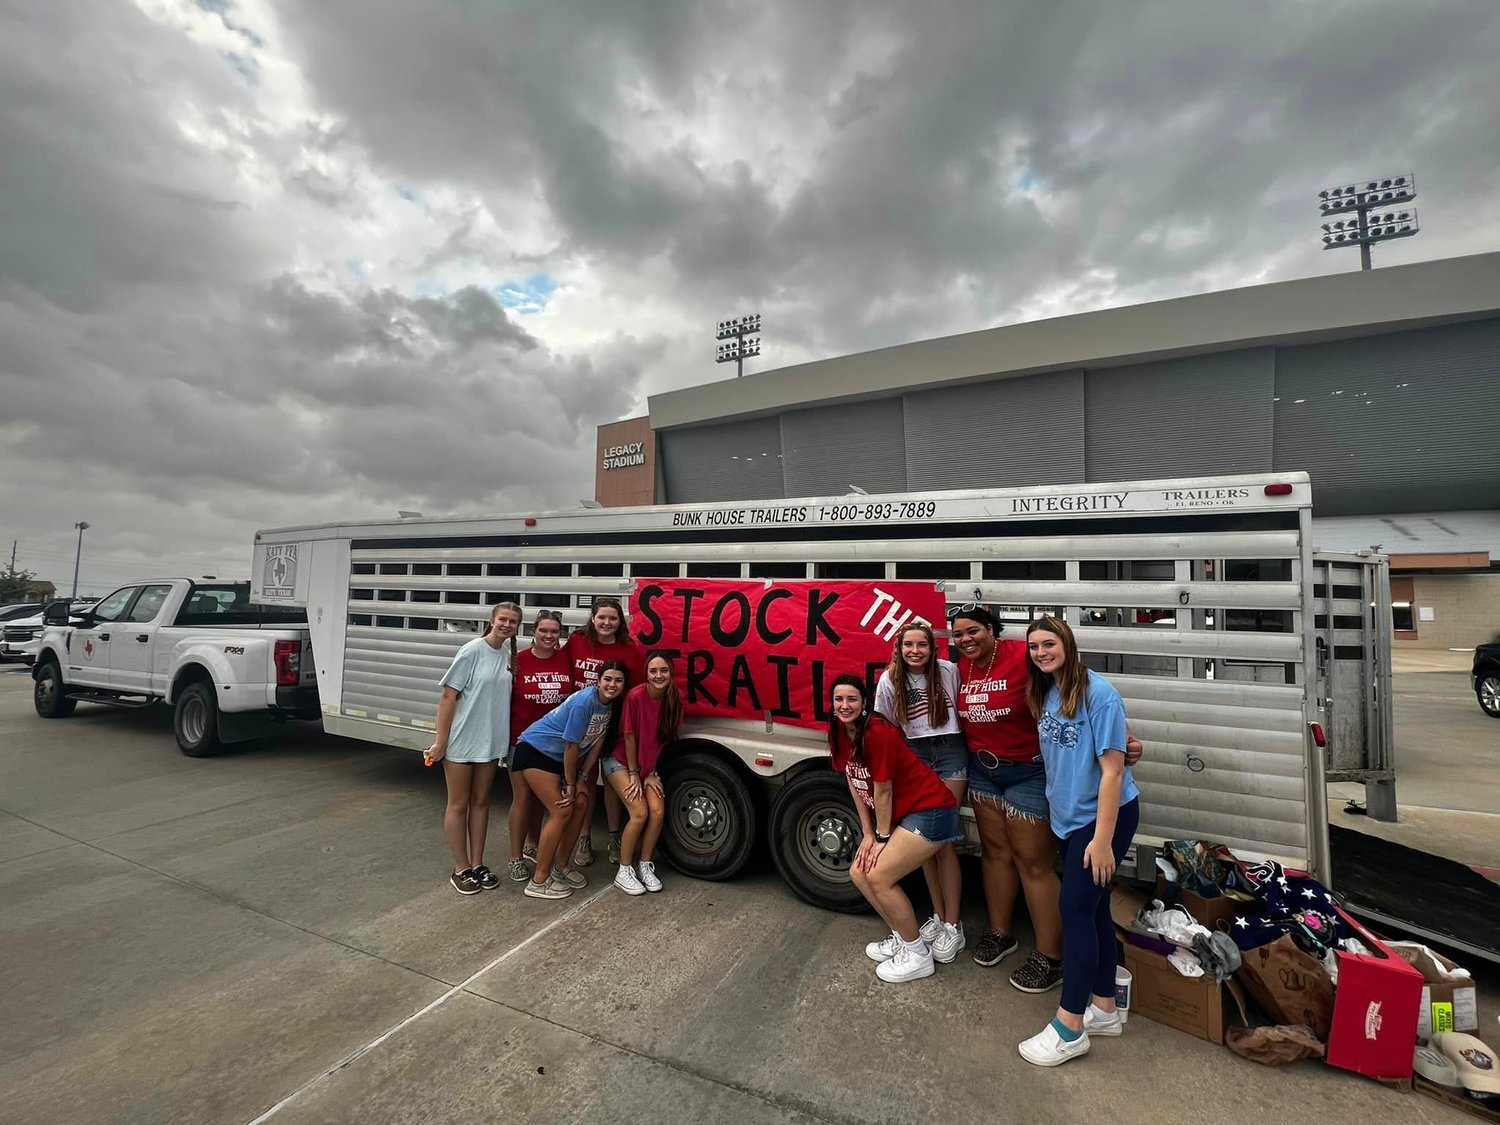 FFA members from Katy and Taylor high schools teamed up to collect and donate over 8,700 items to Katy Christian Ministries through their Stock the Trailer event.